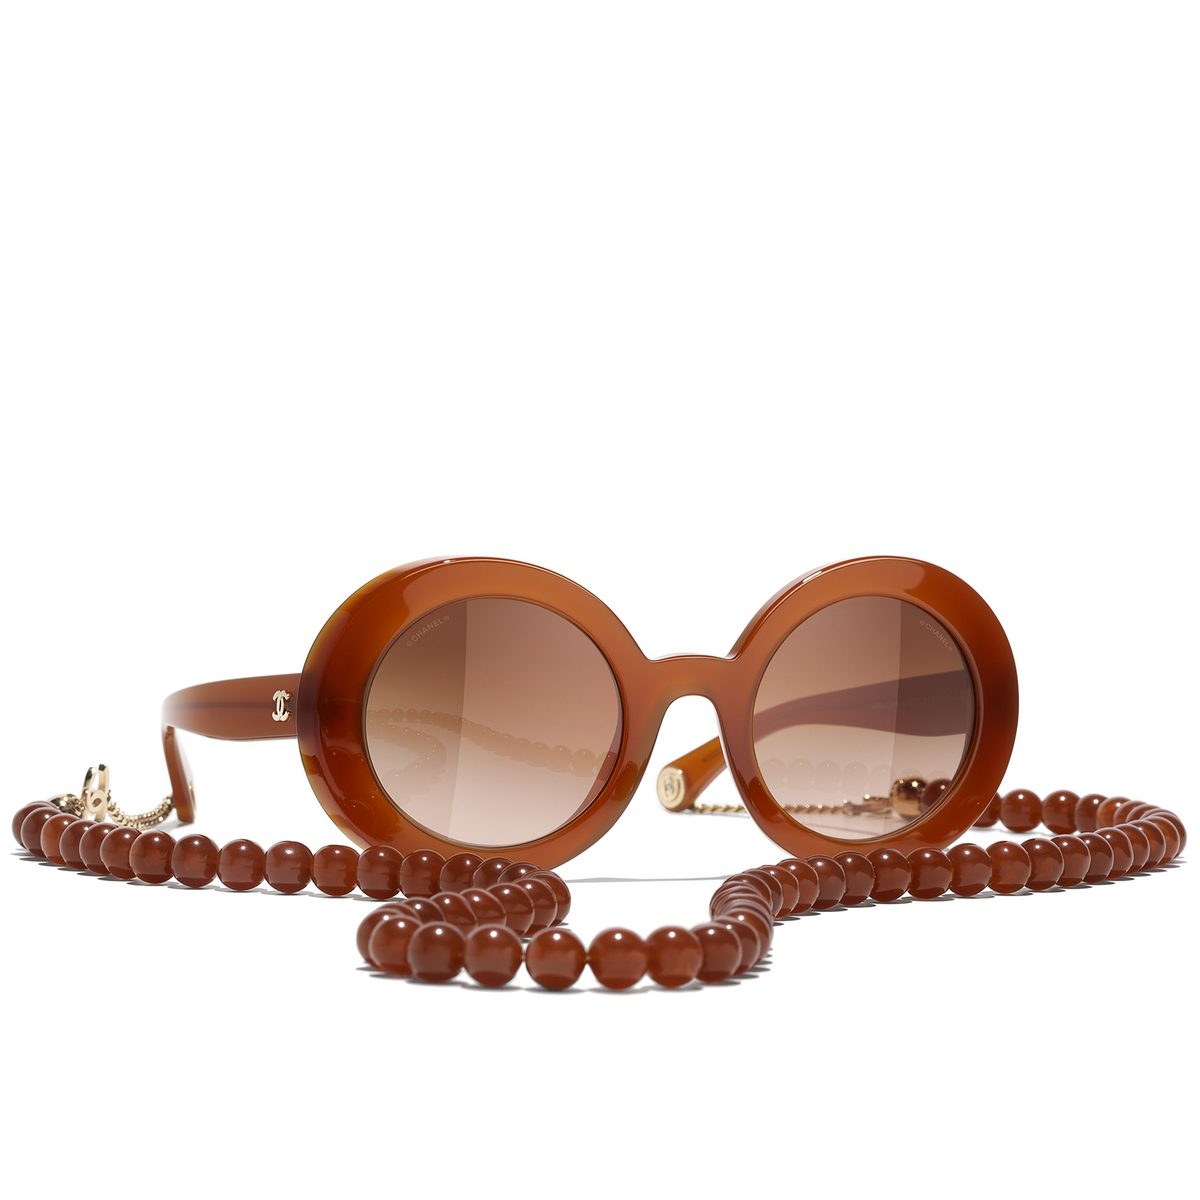 CHANEL round Sunglasses 1722S5 Brown & Gold - three-quarters view